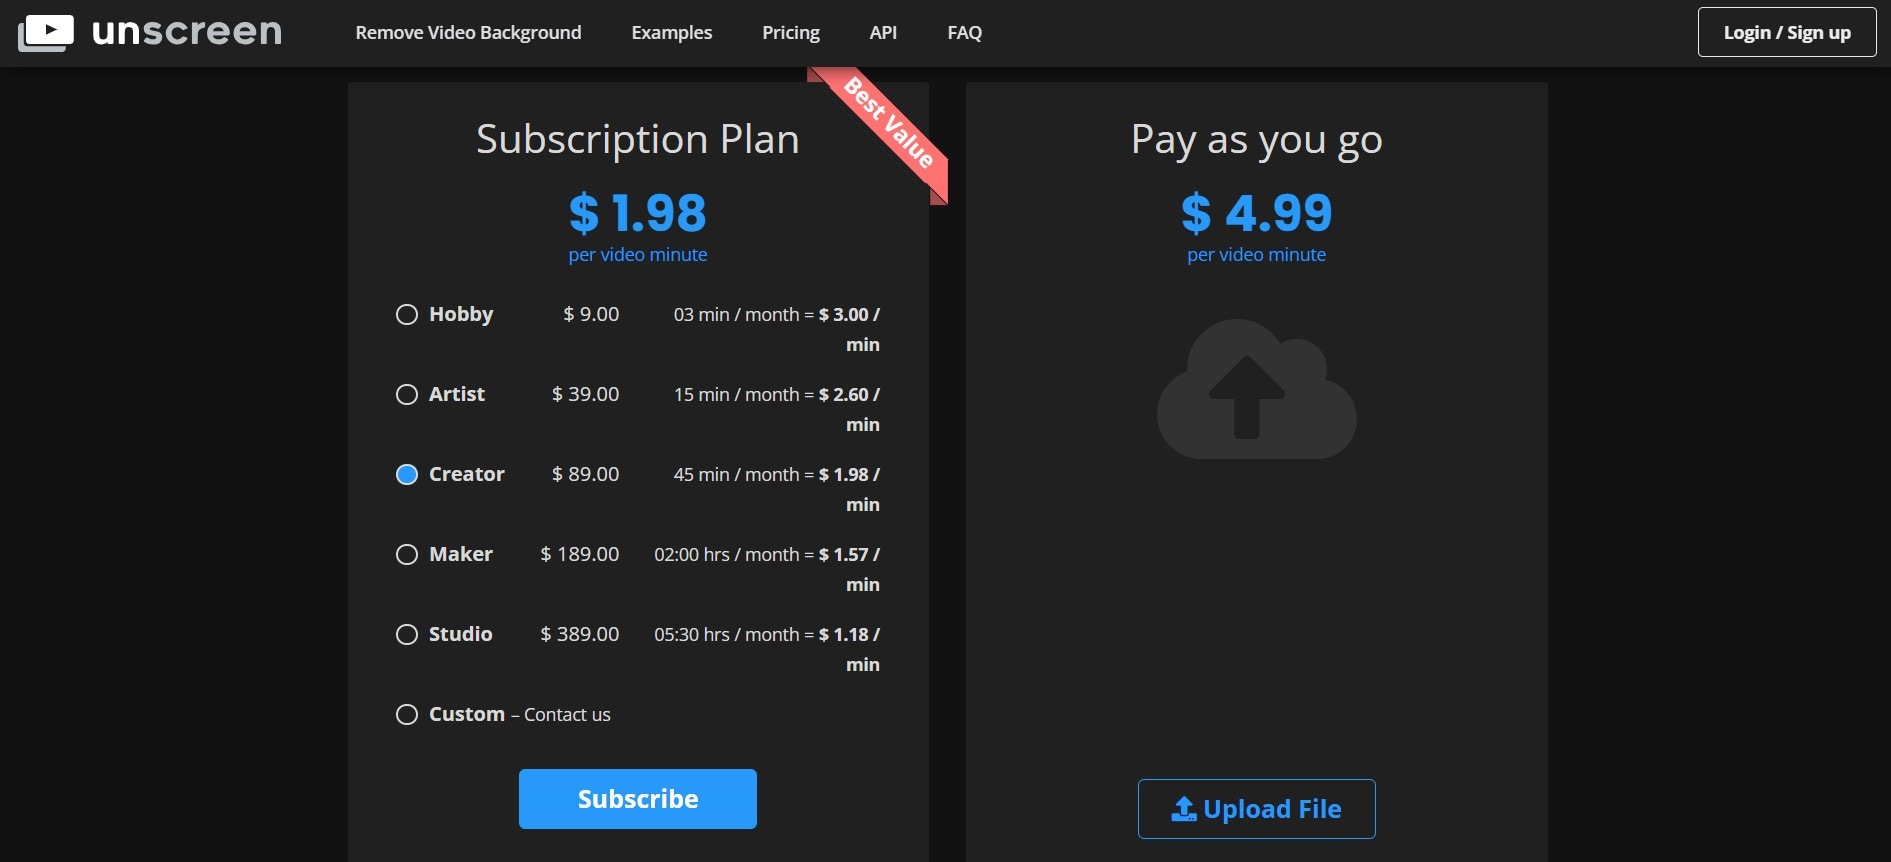 unscreen pricing plans